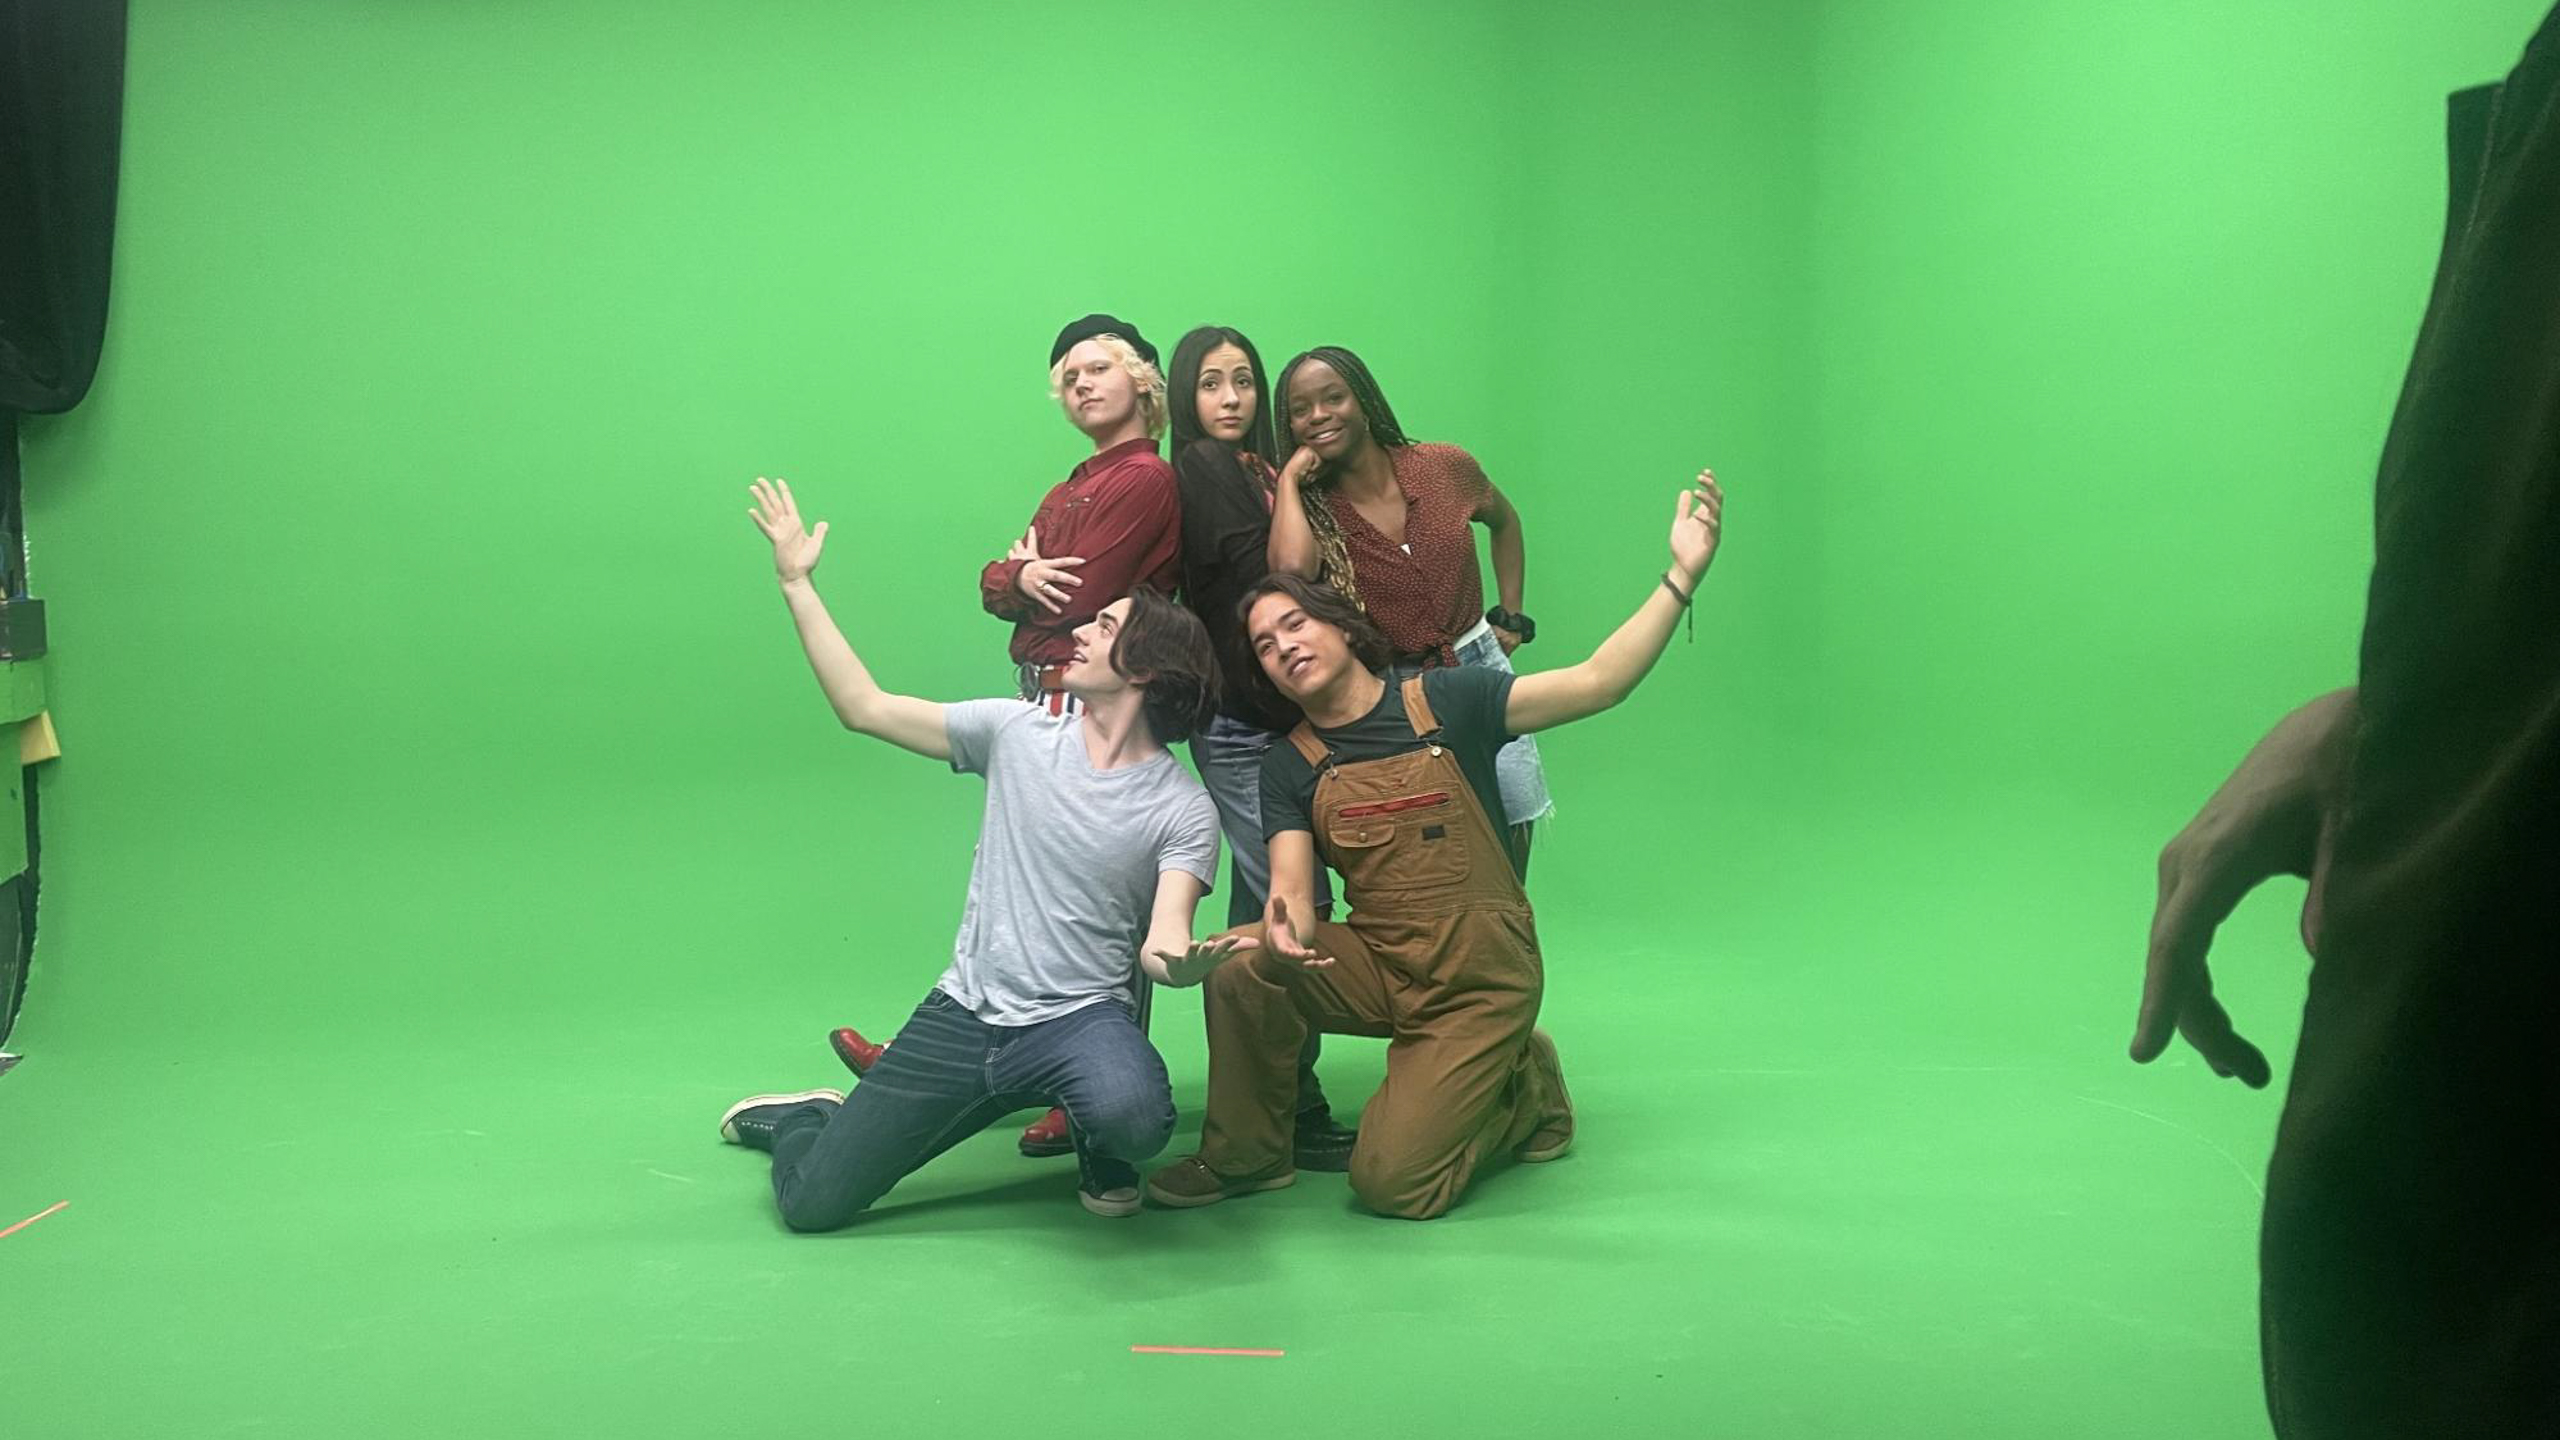 Group of people posing in front of the green screen